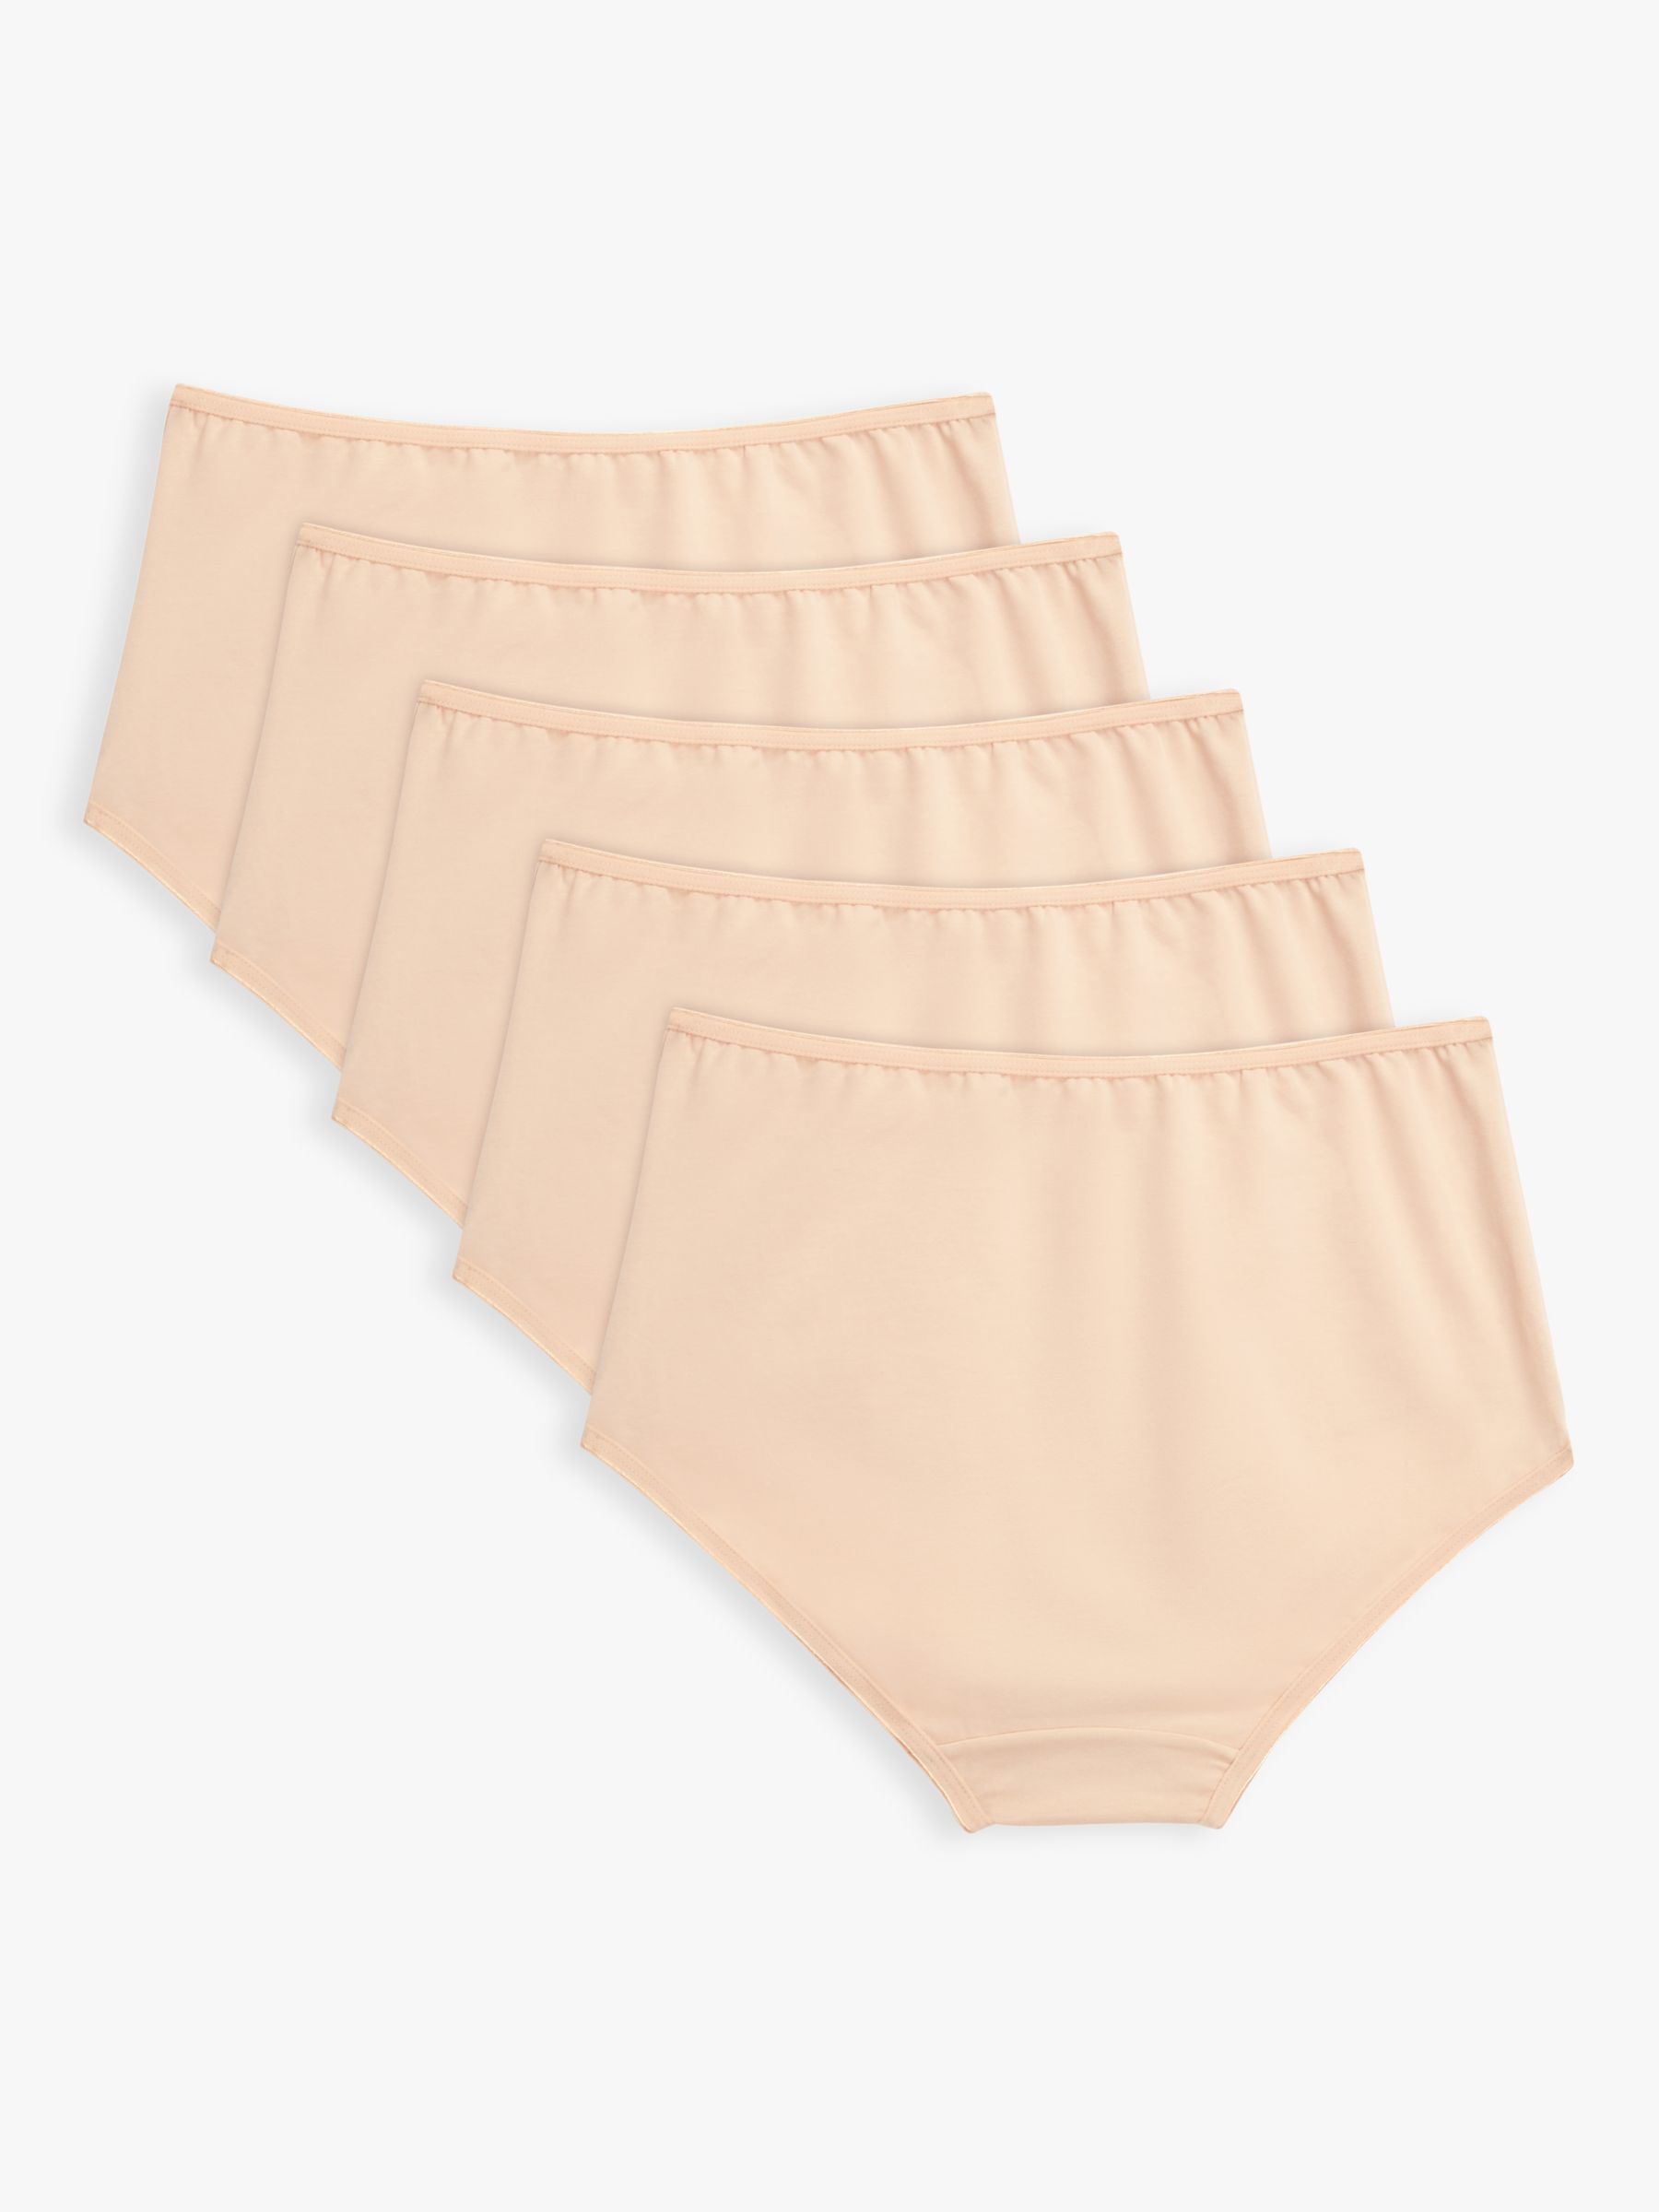 John Lewis ANYDAY Cotton Full Briefs, Pack of 5, Almond at John